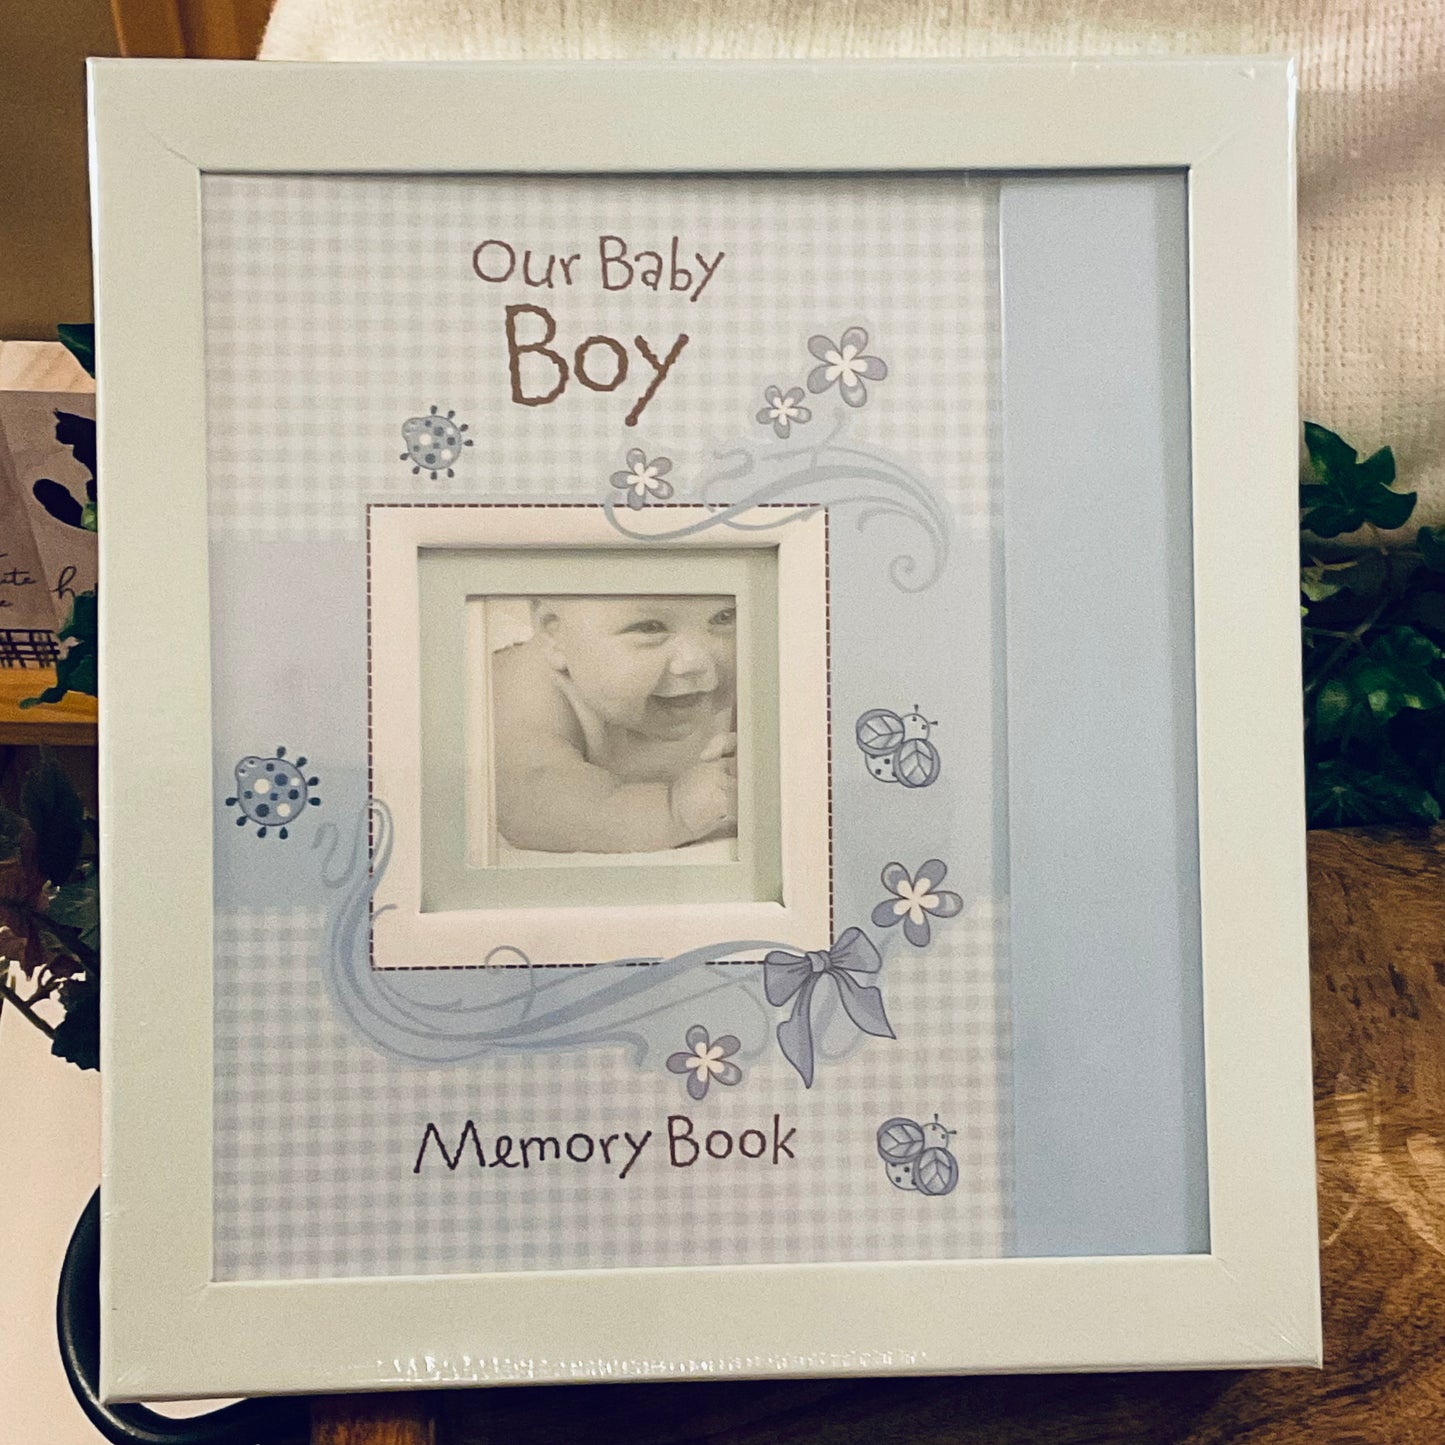 Memory Book - Our Baby Boy